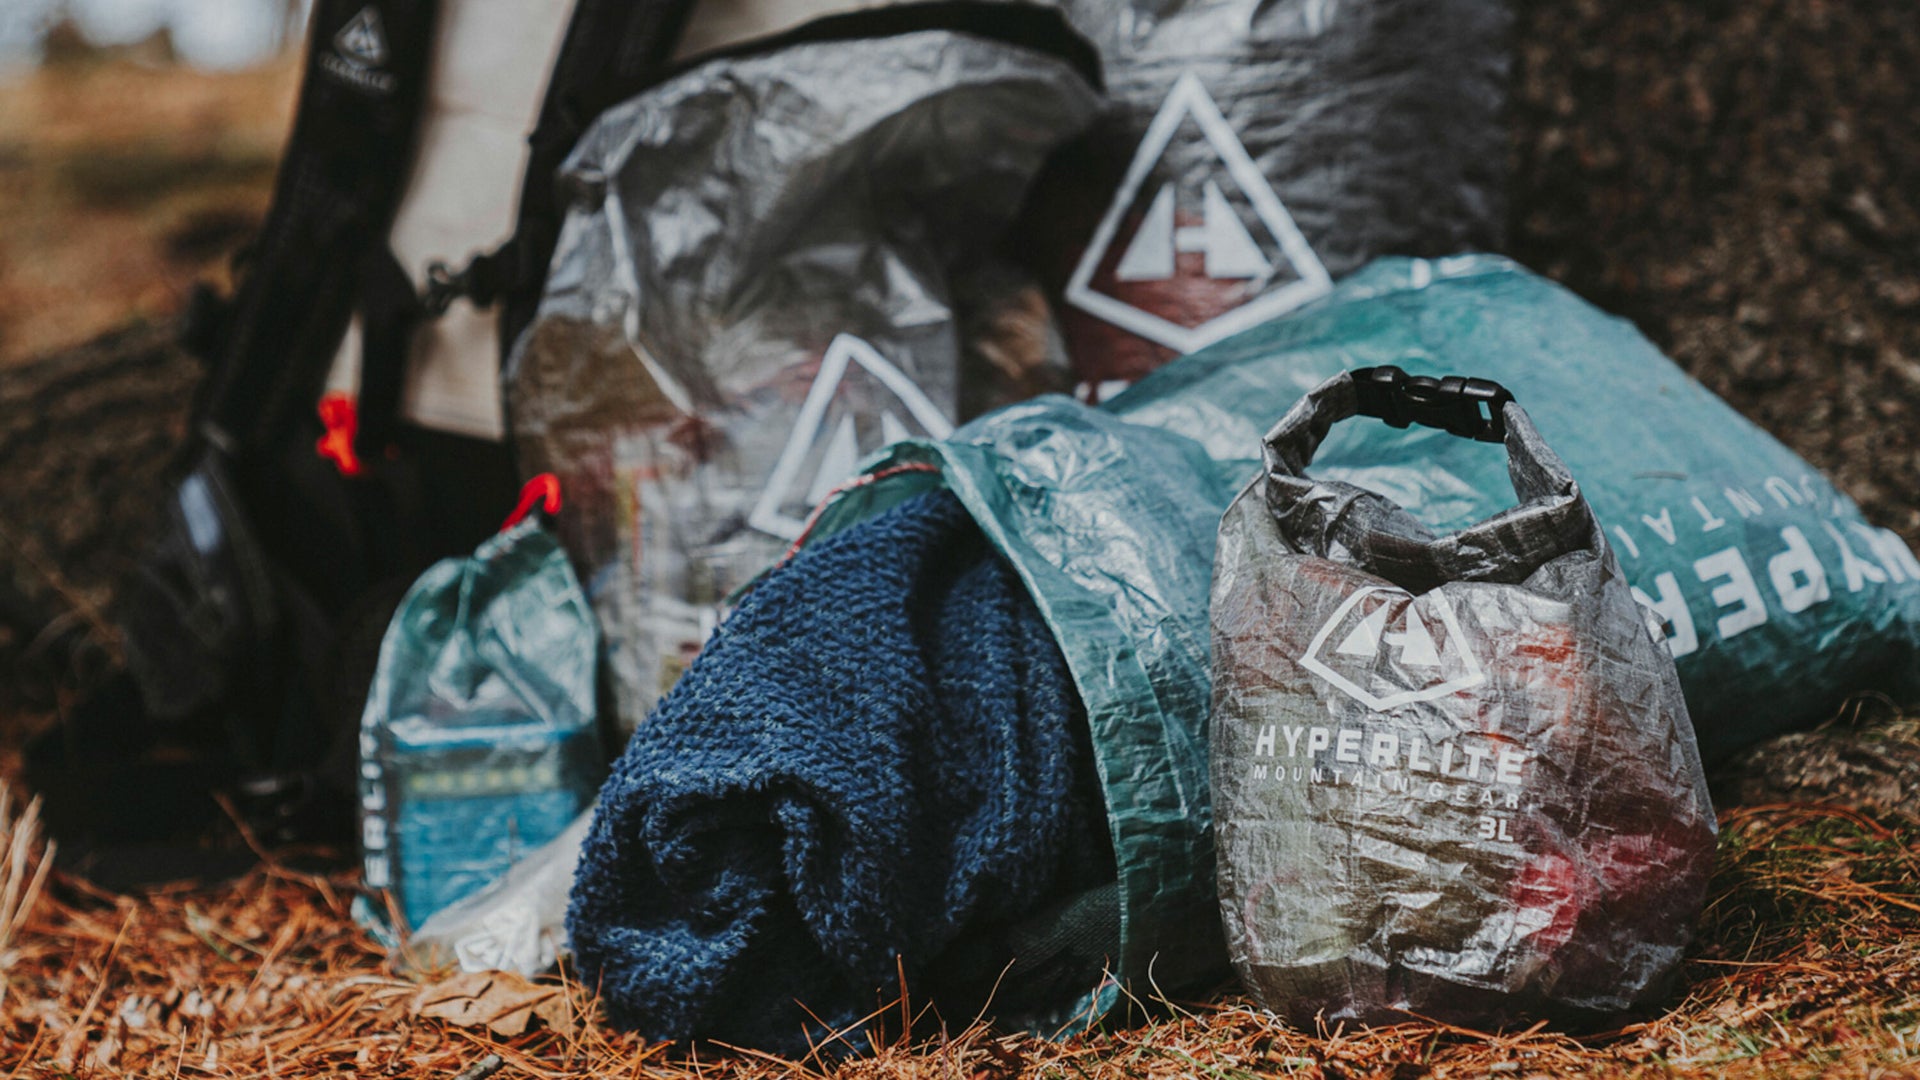 Bags and clothing with recycling symbols on them, placed on a forest floor, indicating an outdoor clean-up or recycling effort.